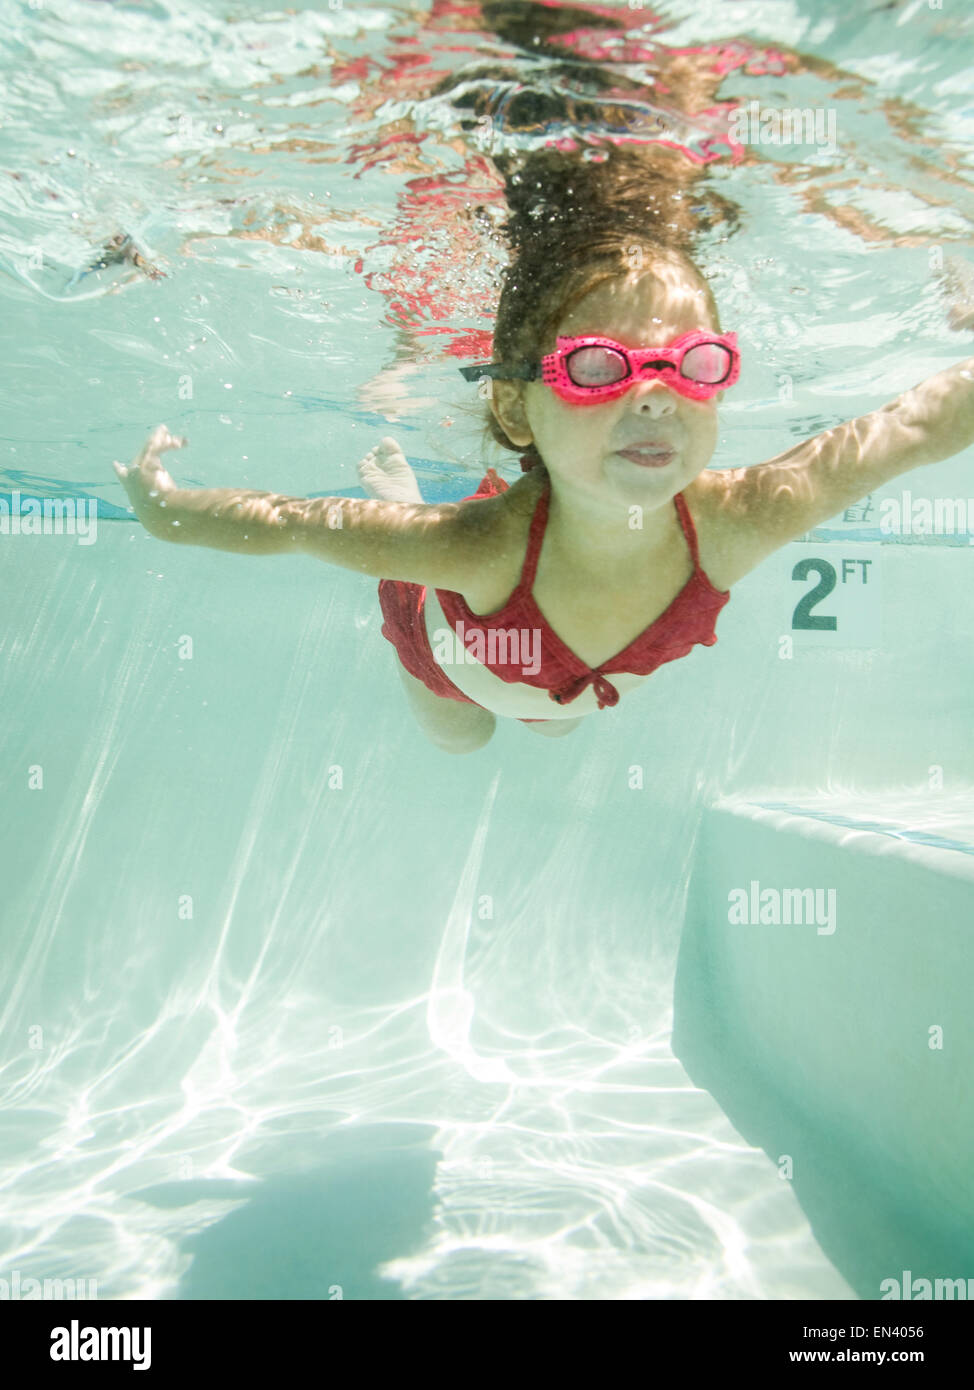 Girl in a swimming pool Banque D'Images